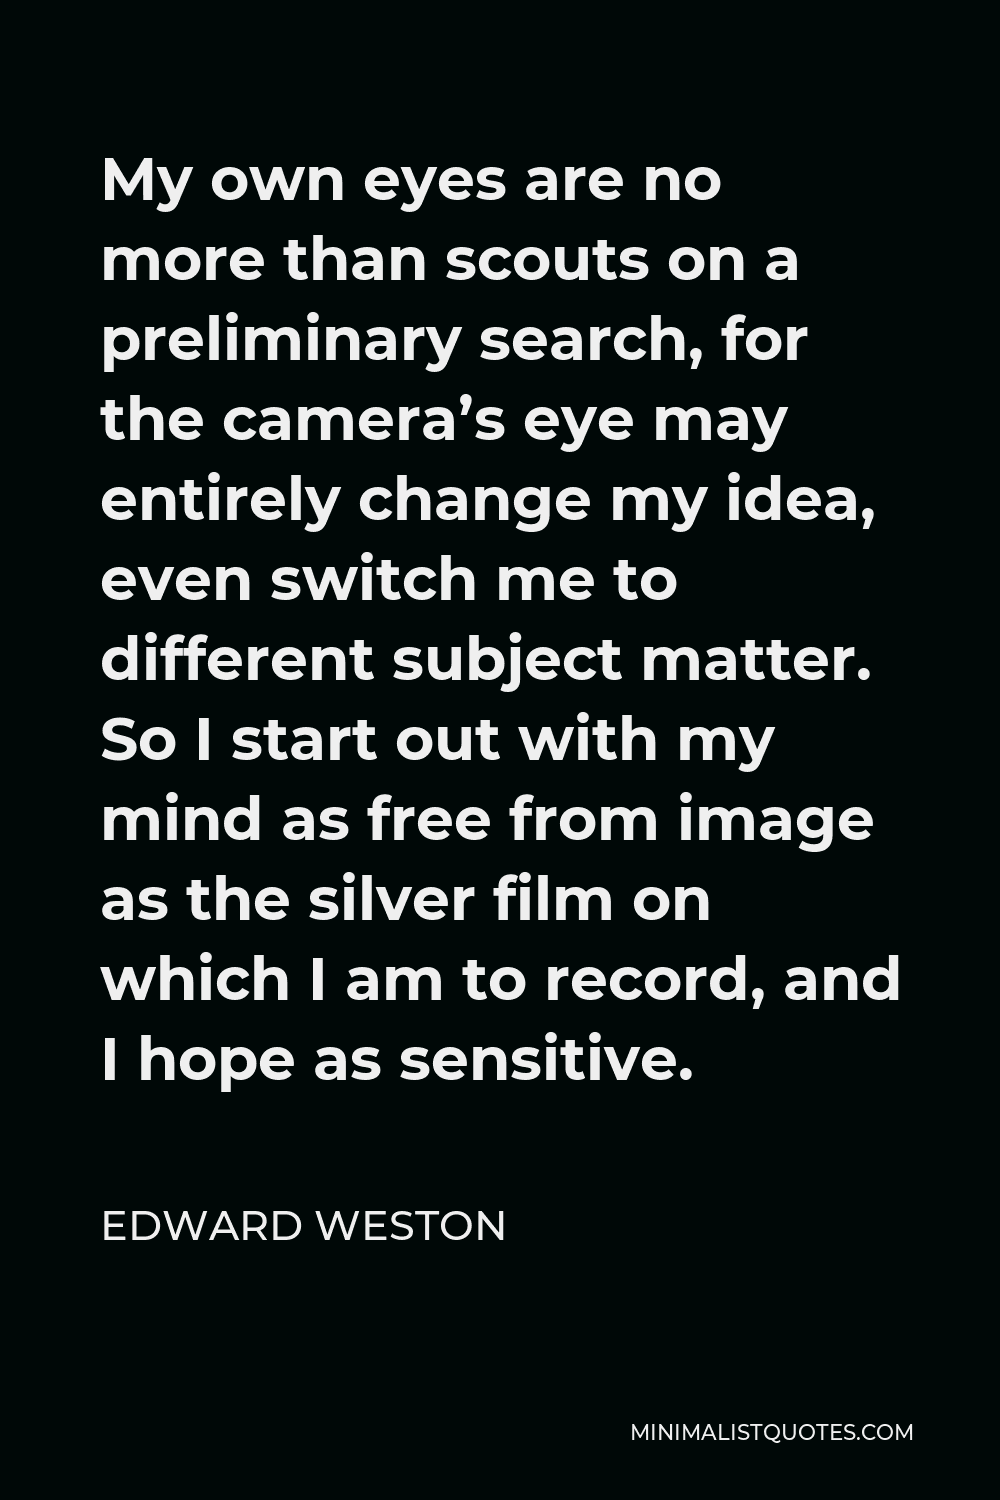 Edward Weston Quote - My own eyes are no more than scouts on a preliminary search, for the camera’s eye may entirely change my idea, even switch me to different subject matter. So I start out with my mind as free from image as the silver film on which I am to record, and I hope as sensitive.